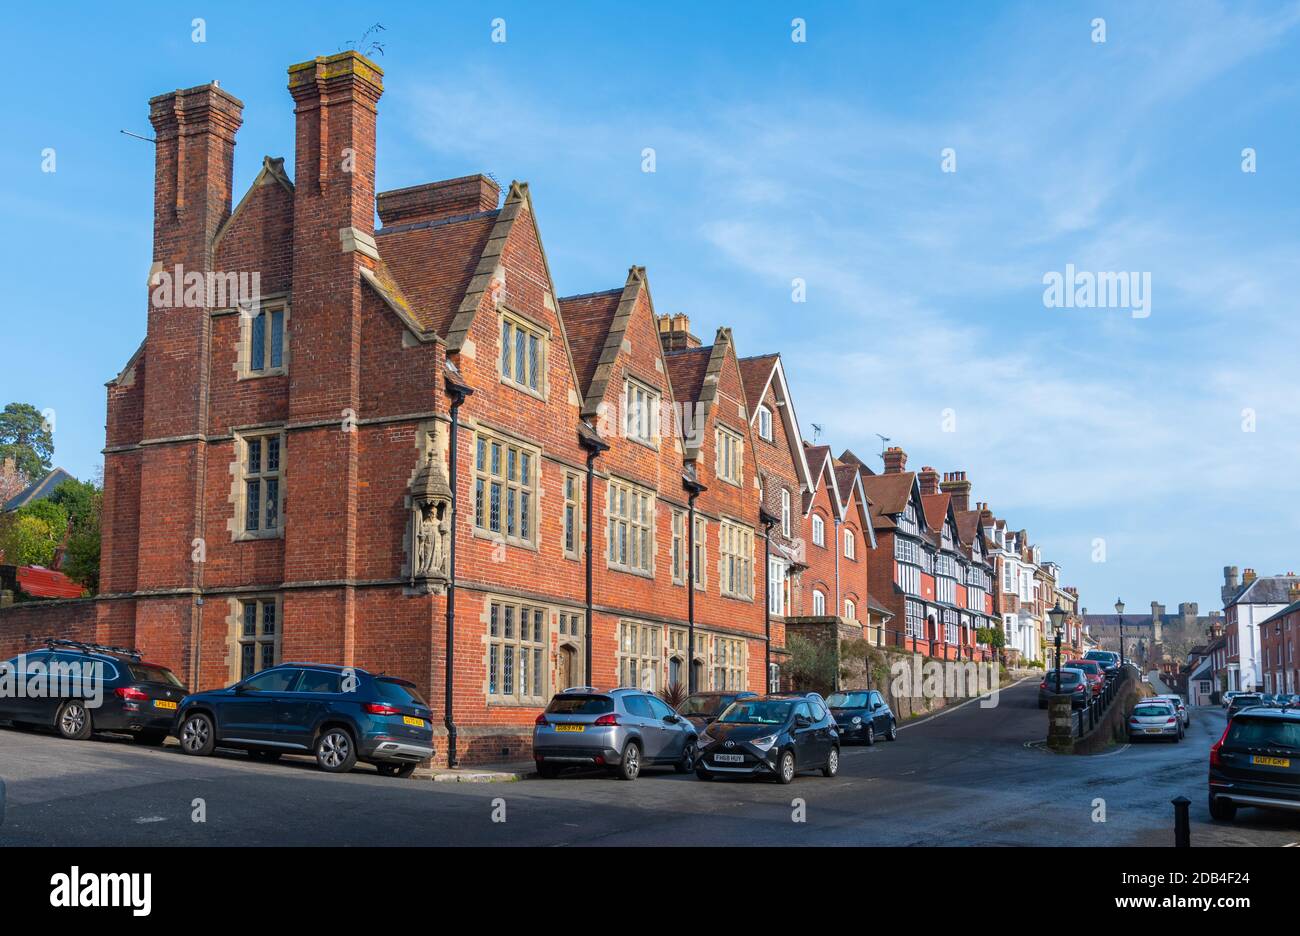 Housing including a 19th century listed building in Maltravers Street in Arundel, West Sussex, England, UK. Stock Photo